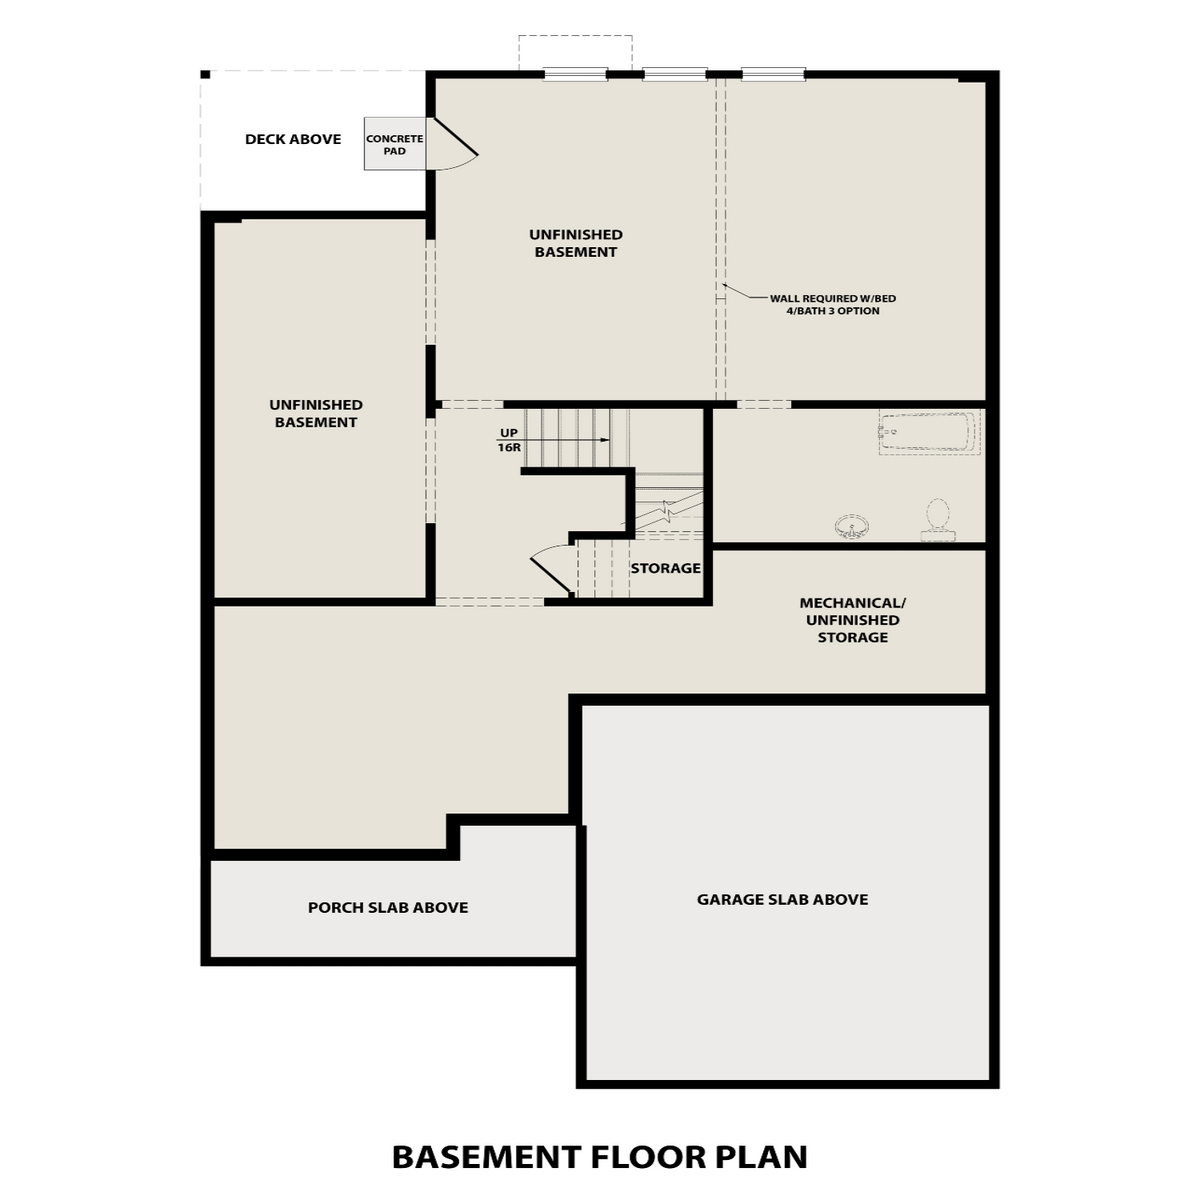 3 - The Ash B- Unfinished Basement  floor plan layout for 51 Riverbirch Way in Davidson Homes' Riverwood community.